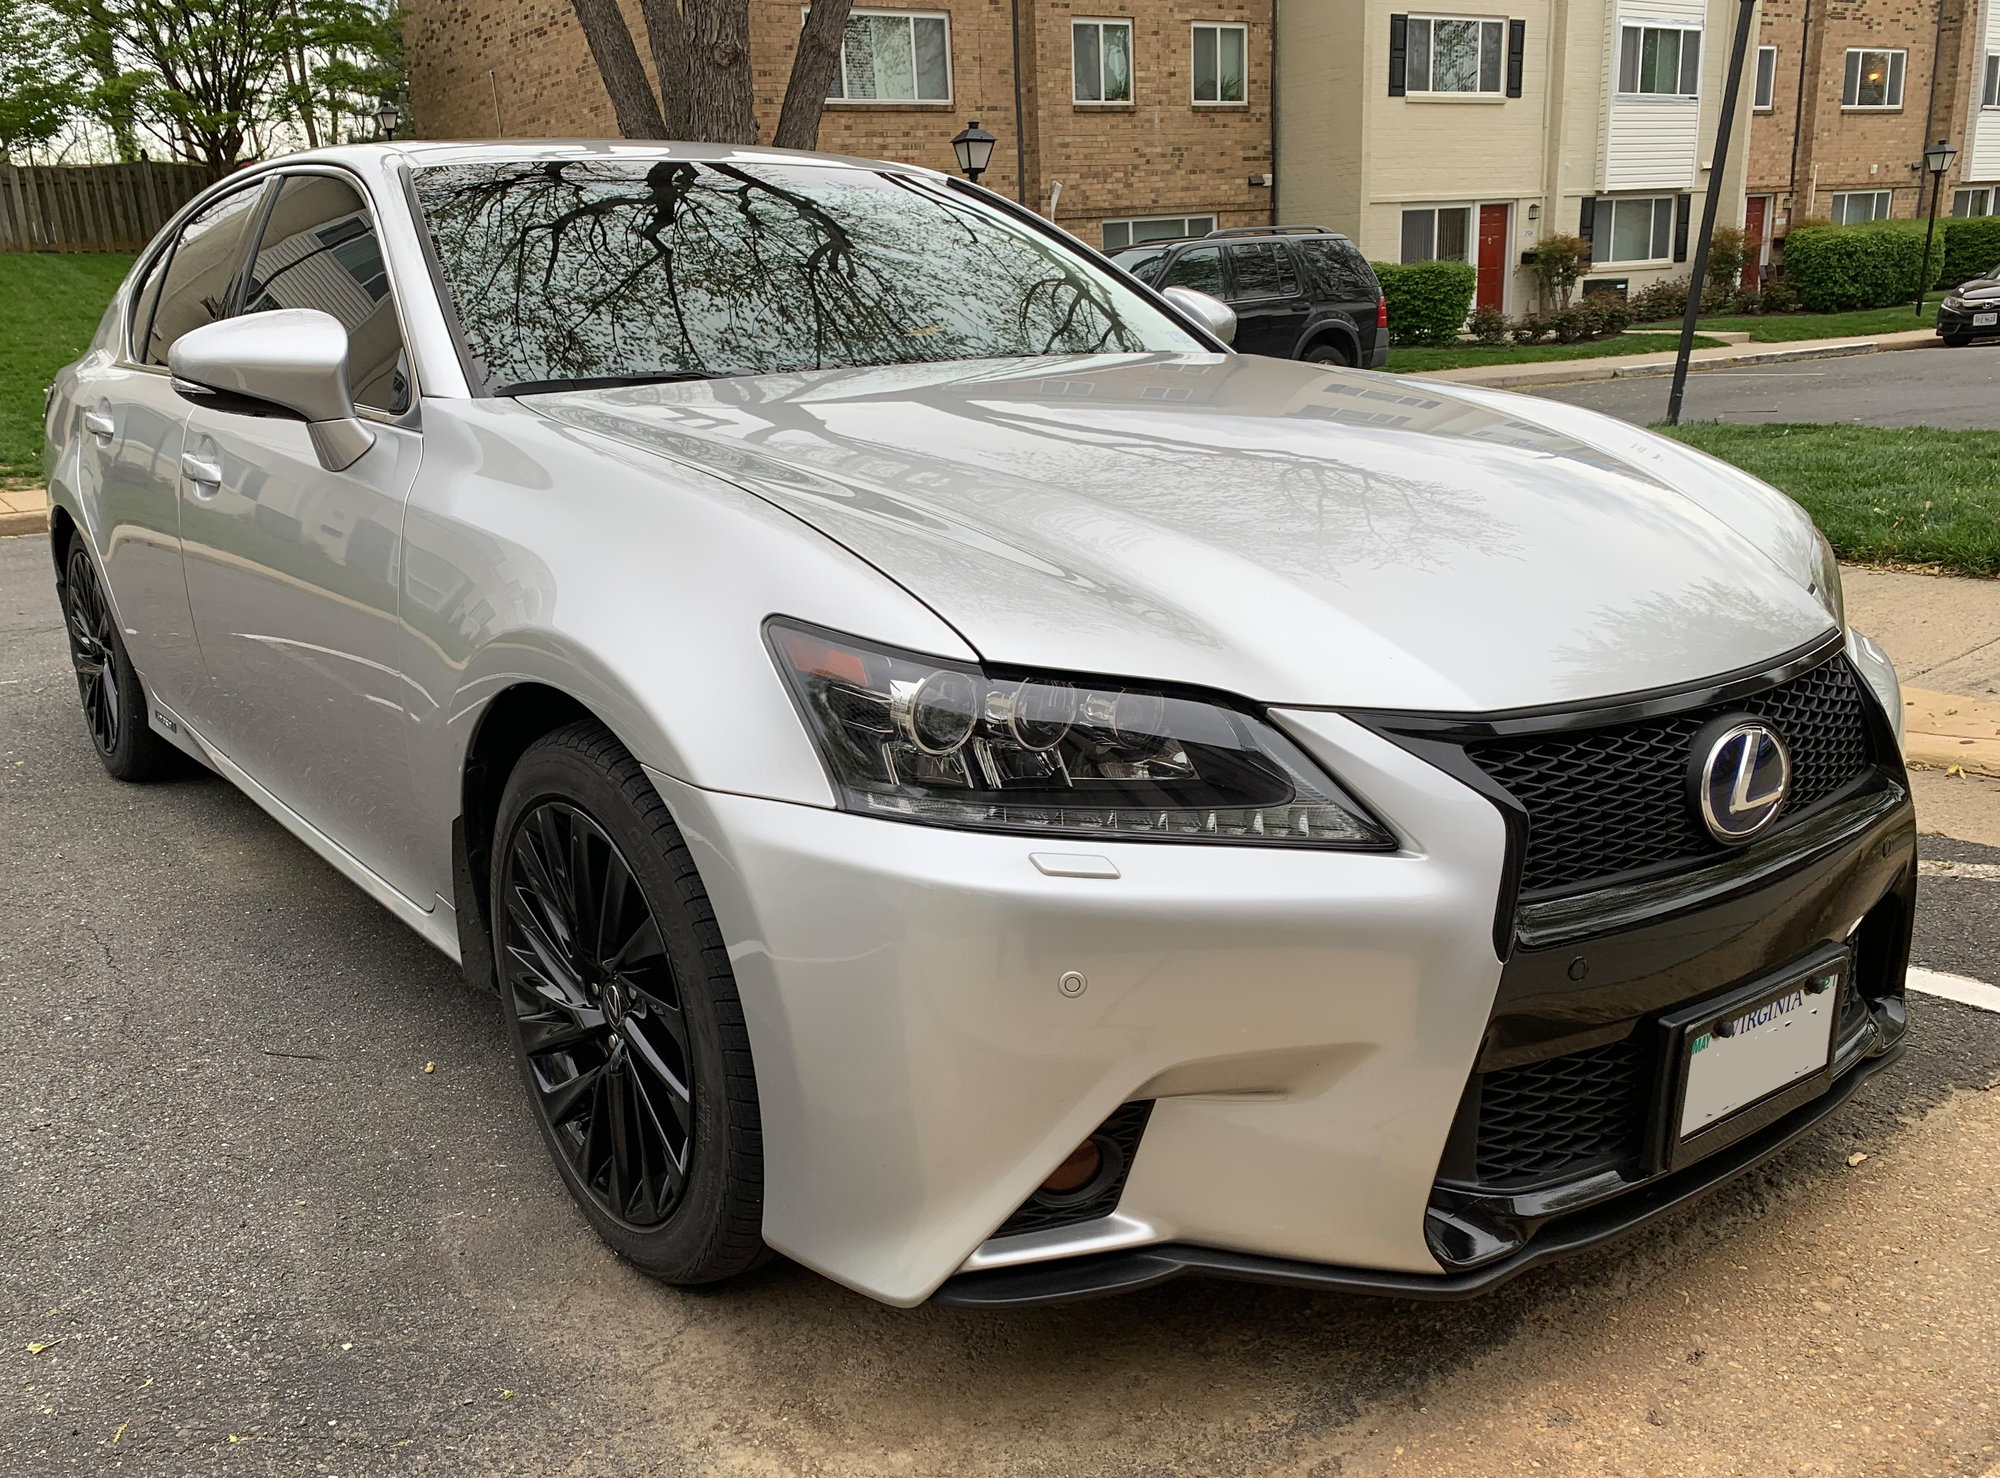 Just Picked up a 2015 GS350 - Page 2 - ClubLexus - Lexus Forum Discussion